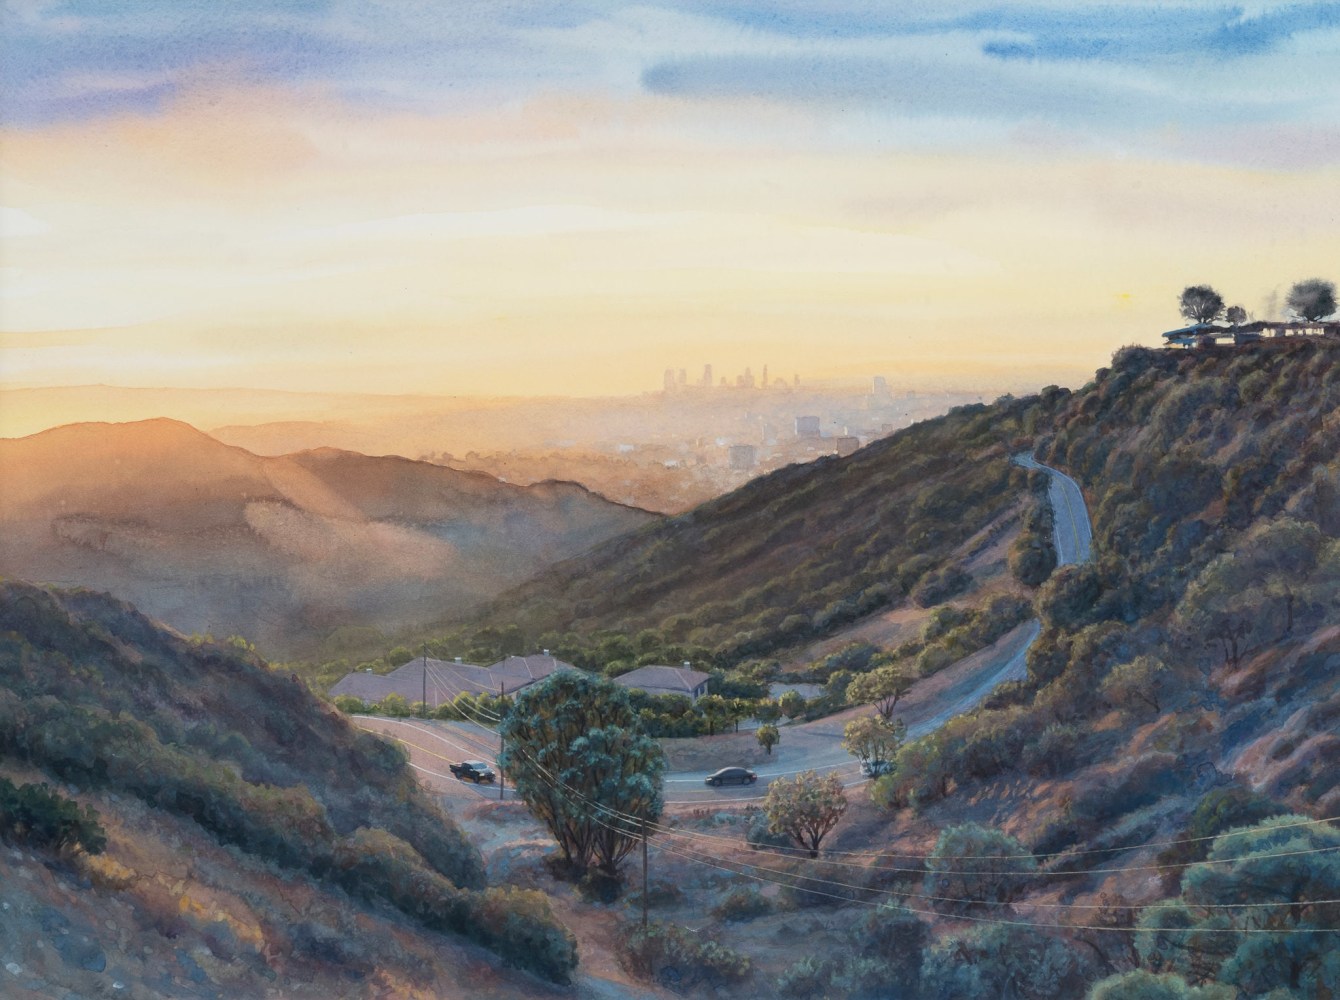 Tim Gardner

Sunrise, L.A.

2019

Watercolor and gouache on paper

15 x 20 inches (38.1 x 50.8 cm)

16 x 21 inches (40.6 x 53.3 cm) paper

23 7/8 x 28 3/8 inches (60.6 x 72.1 cm)

Signed, dated verso

TG 565

&amp;nbsp;

INQUIRE